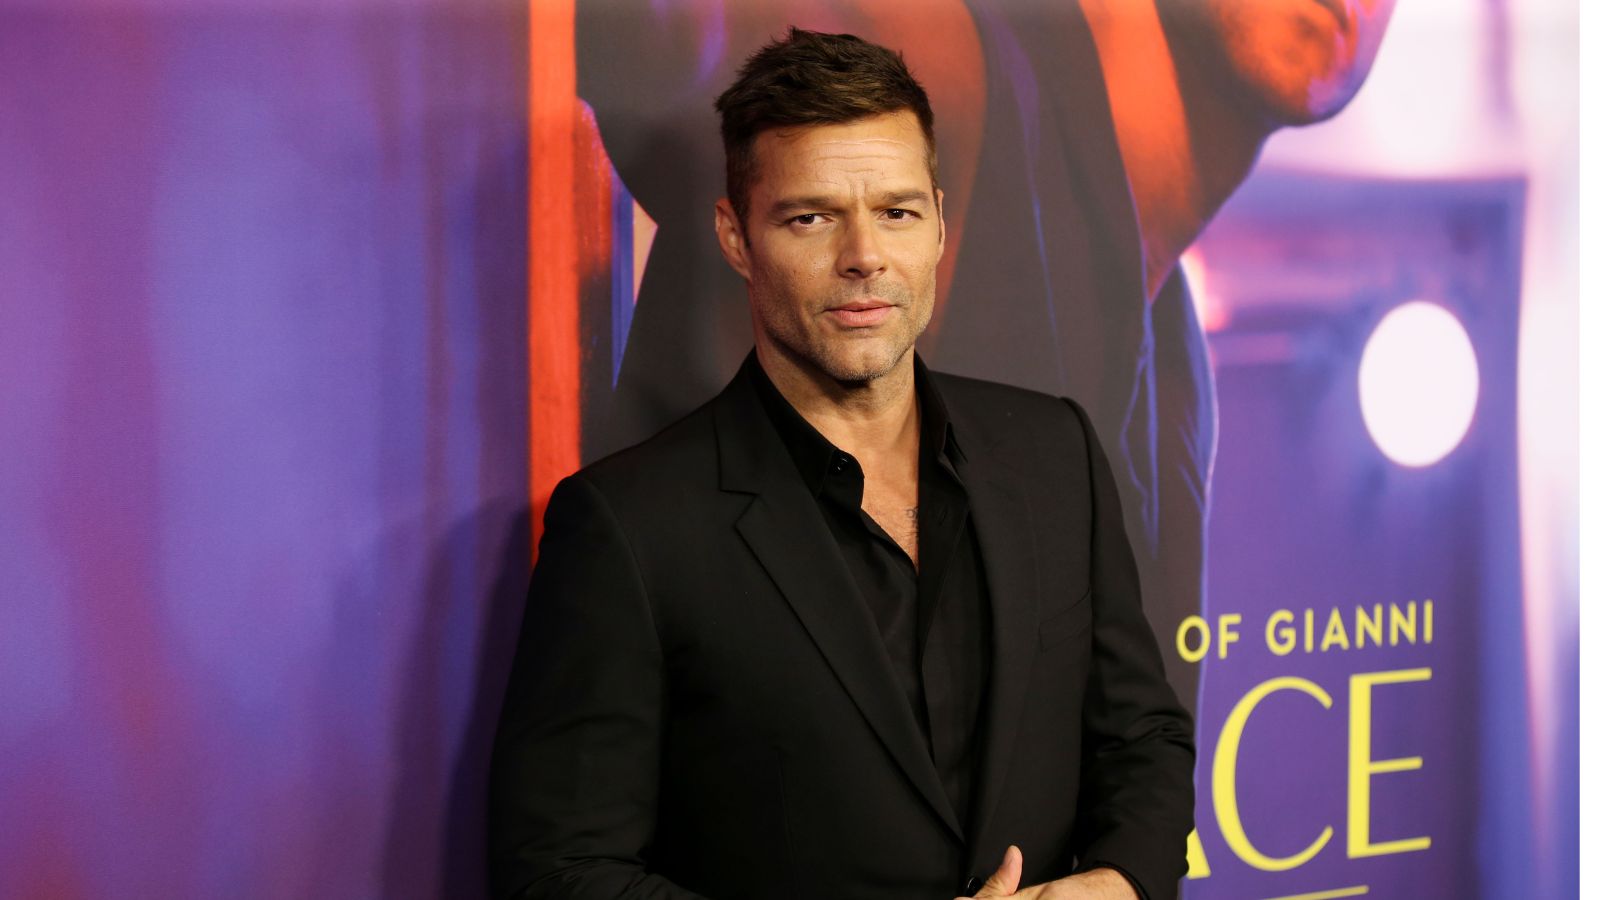 Ricky Martin Information $20 Million Lawsuit In opposition to His